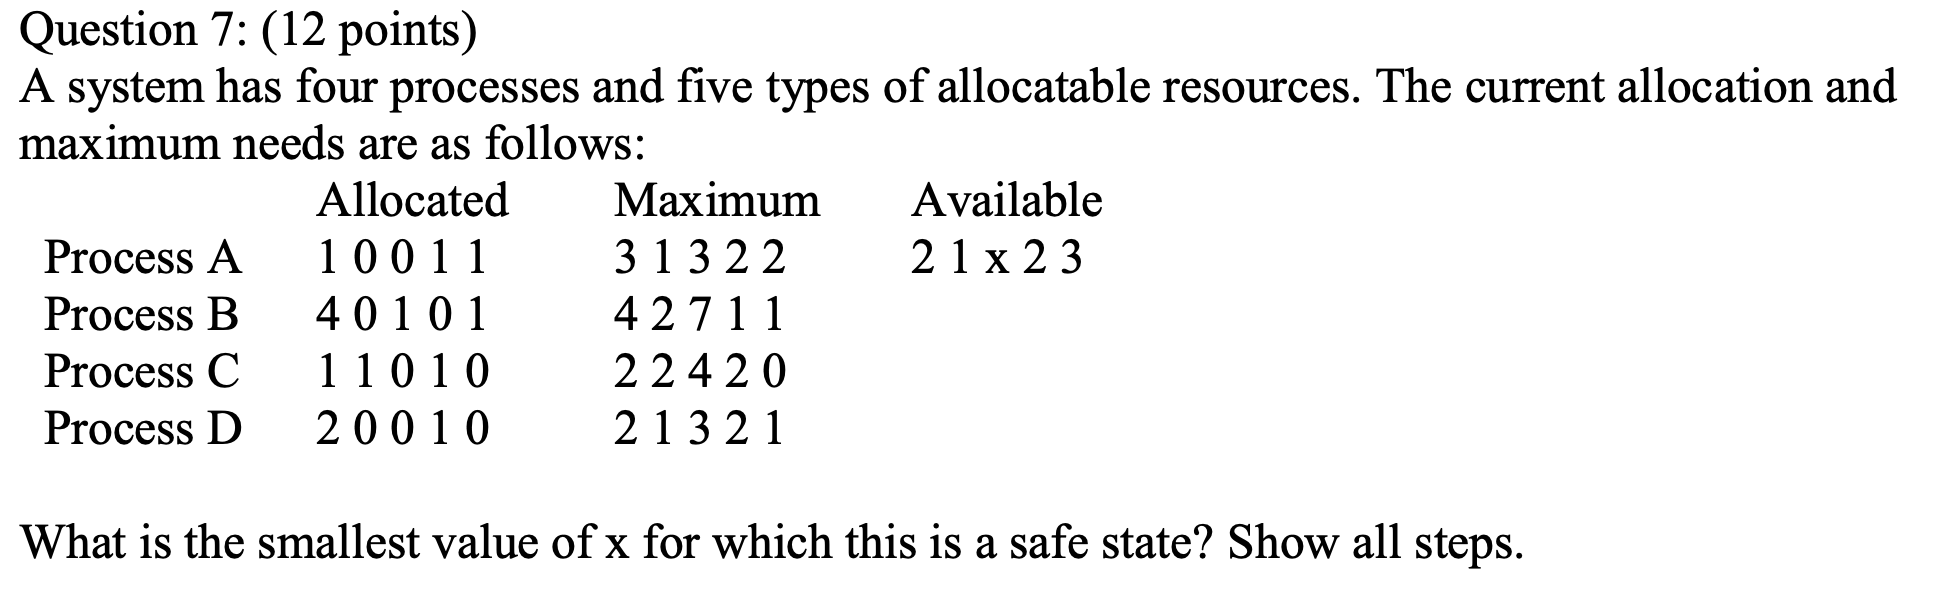 Question 7: (12 points) A system has four processes and five types of allocatable resources. The current allocation and maxim